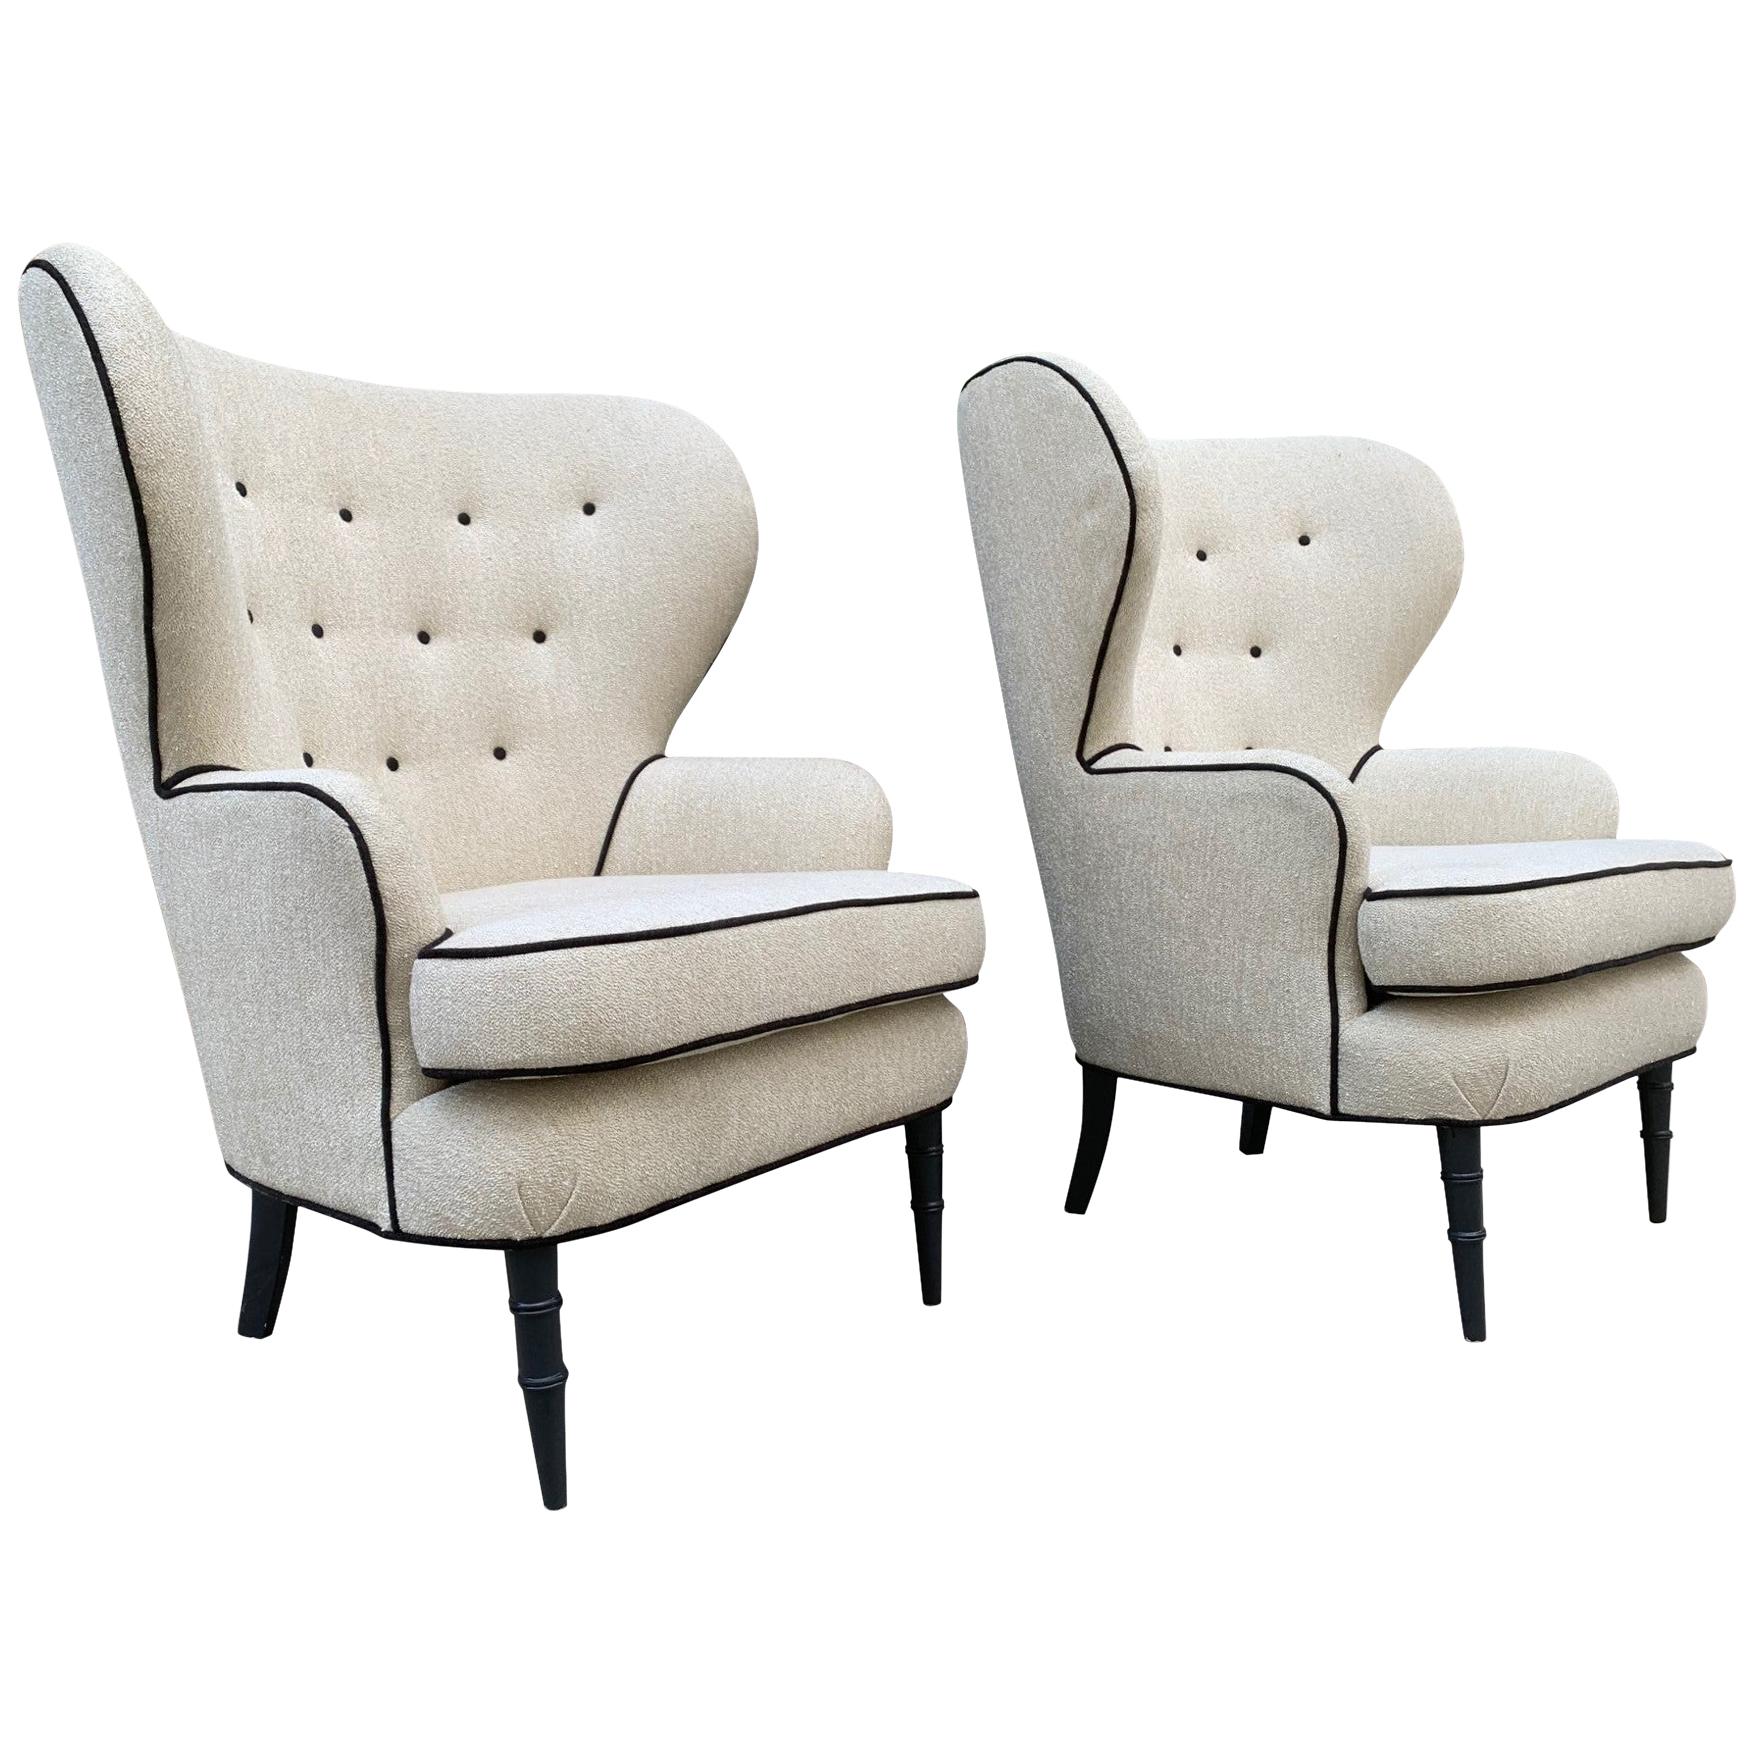 Pair of Modern Tufted Wingback Chairs